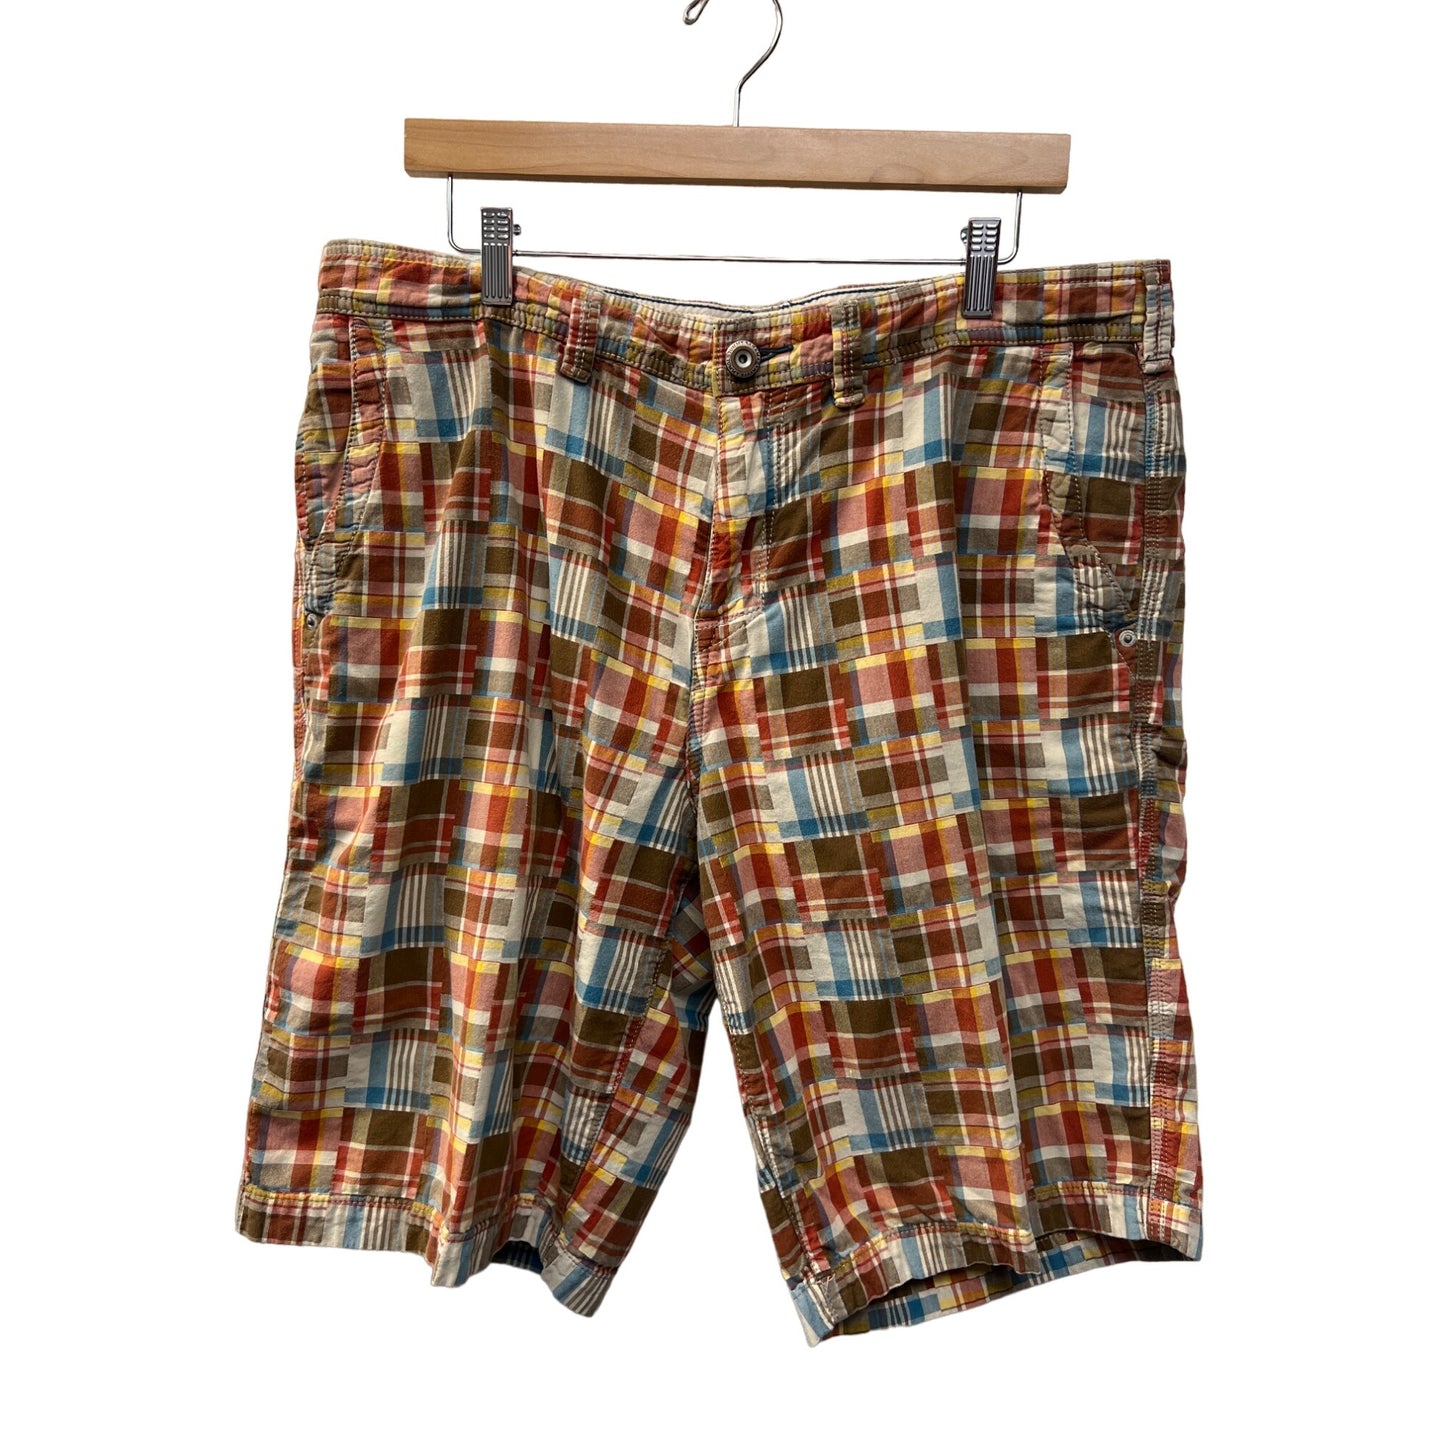 Tommy Bahama Brown Plaid Patchwork Madras Print Board Shorts